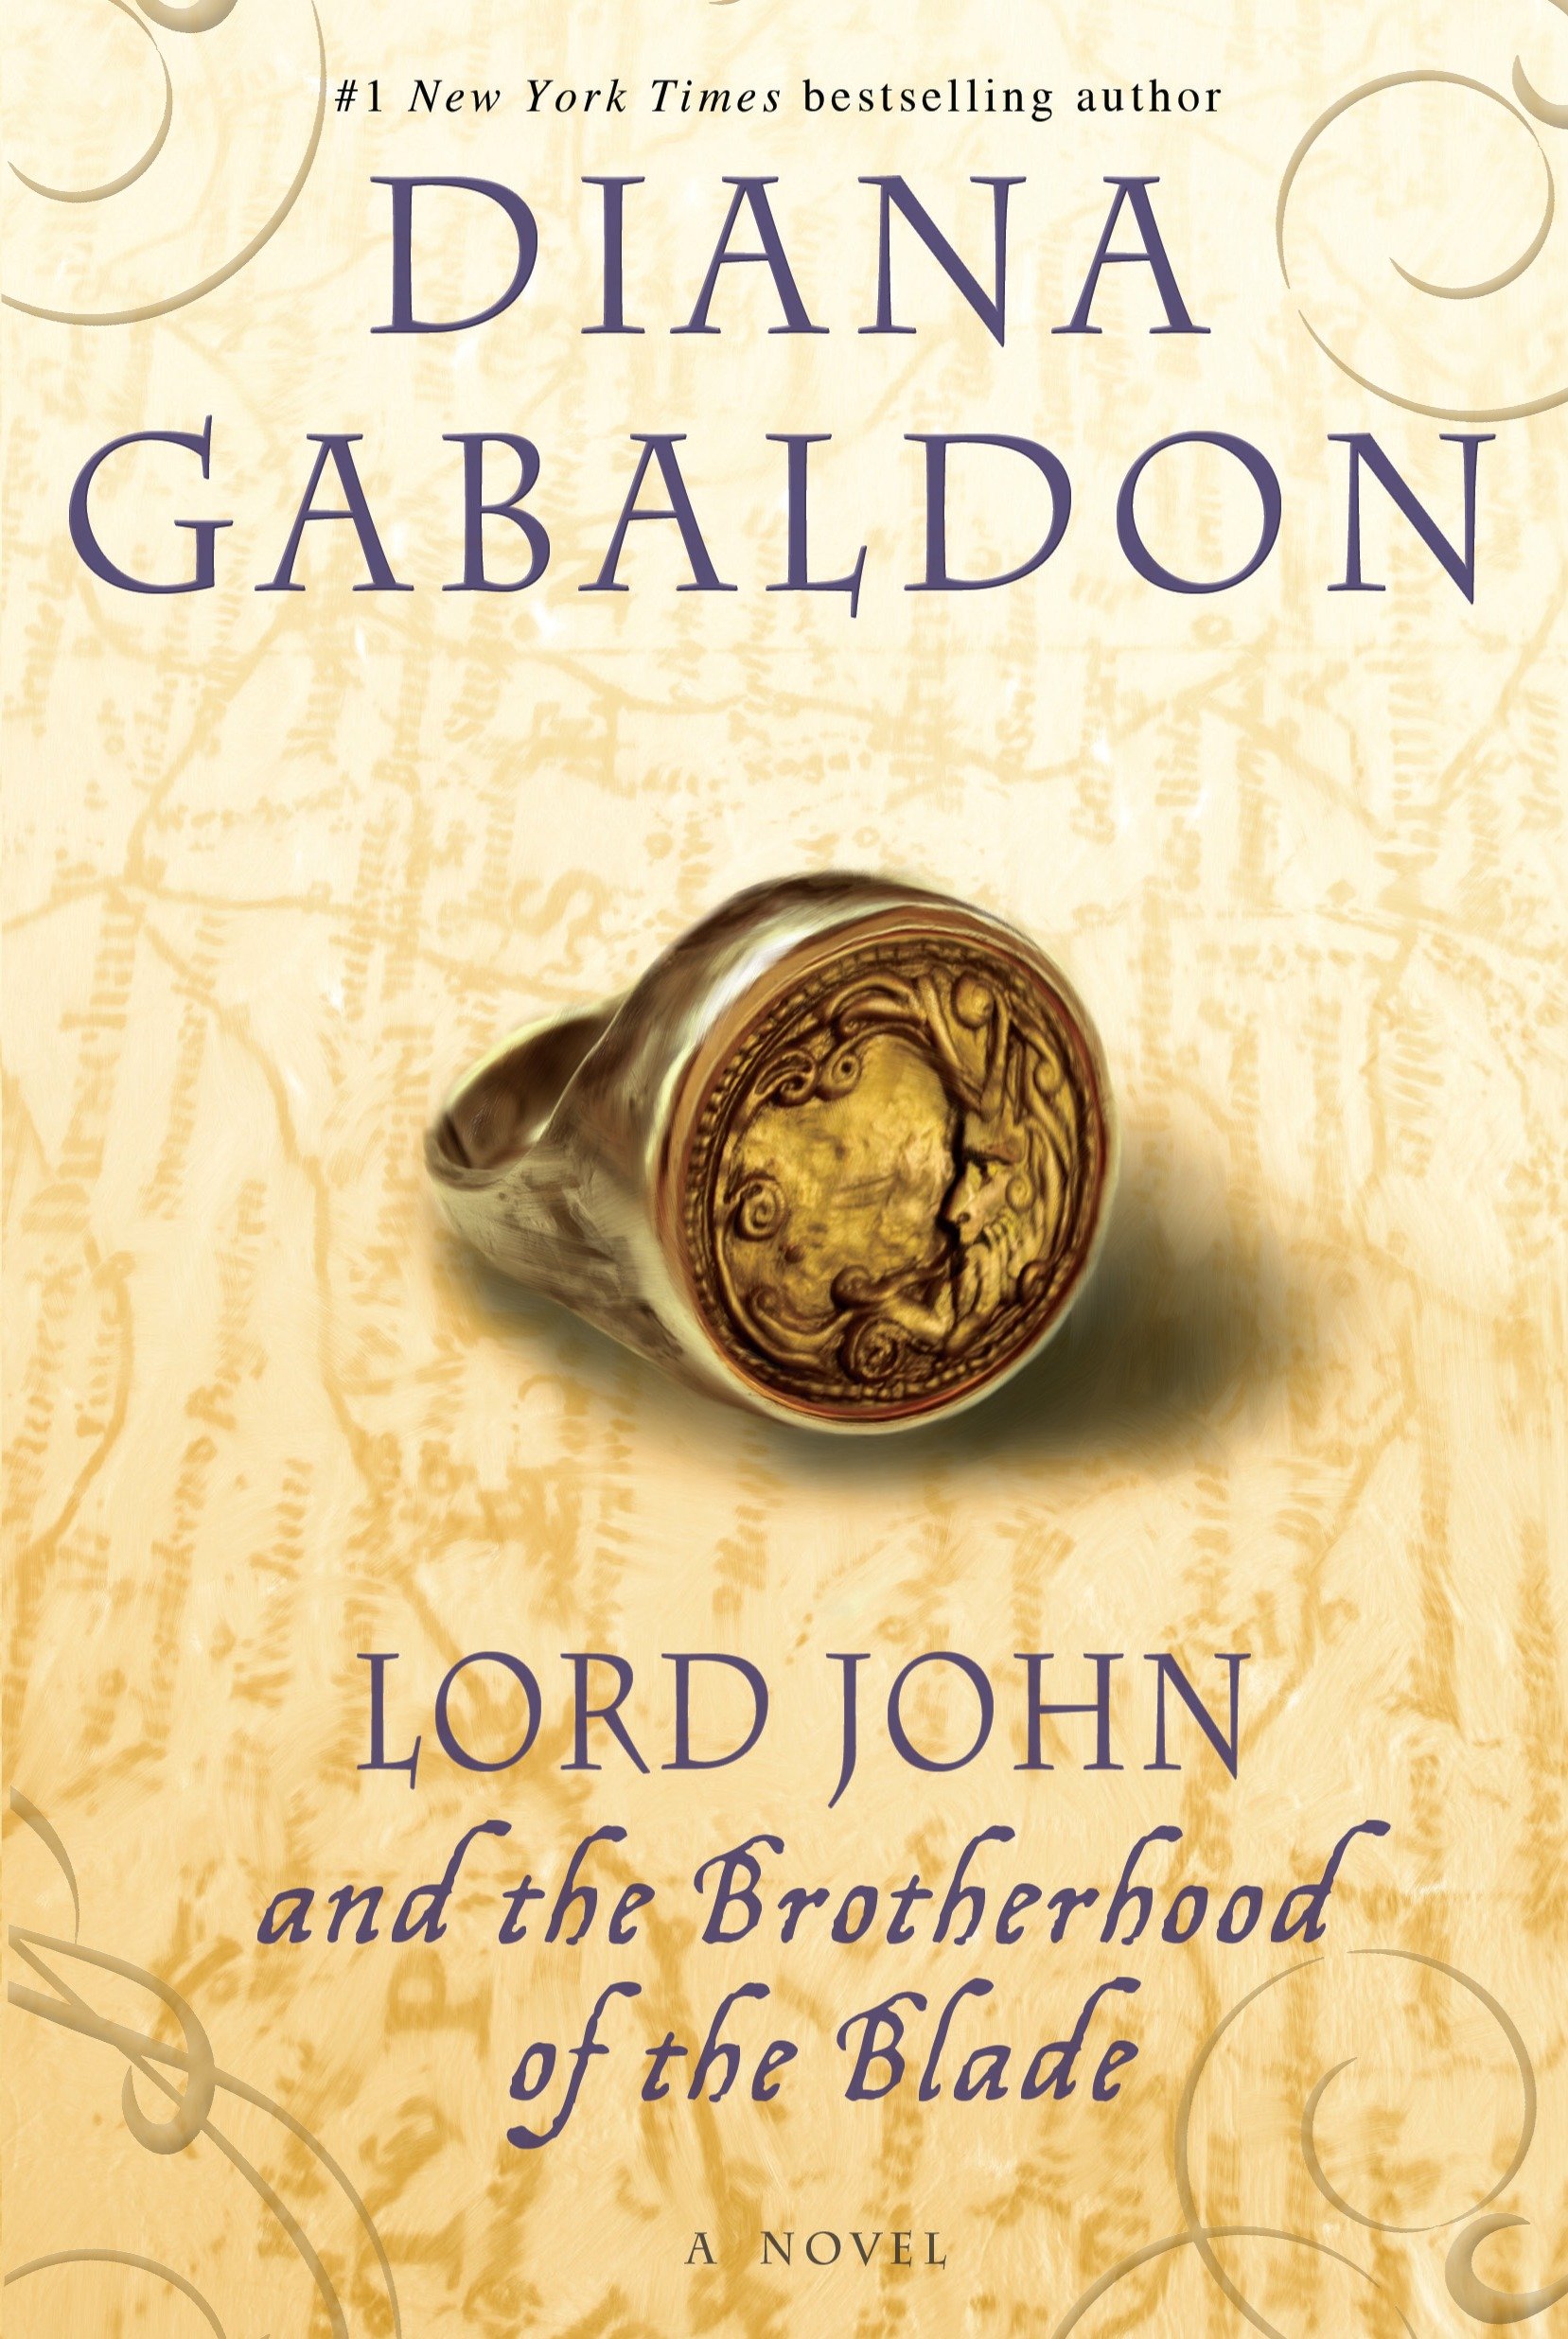 Lord John and the brotherhood of the blade cover image